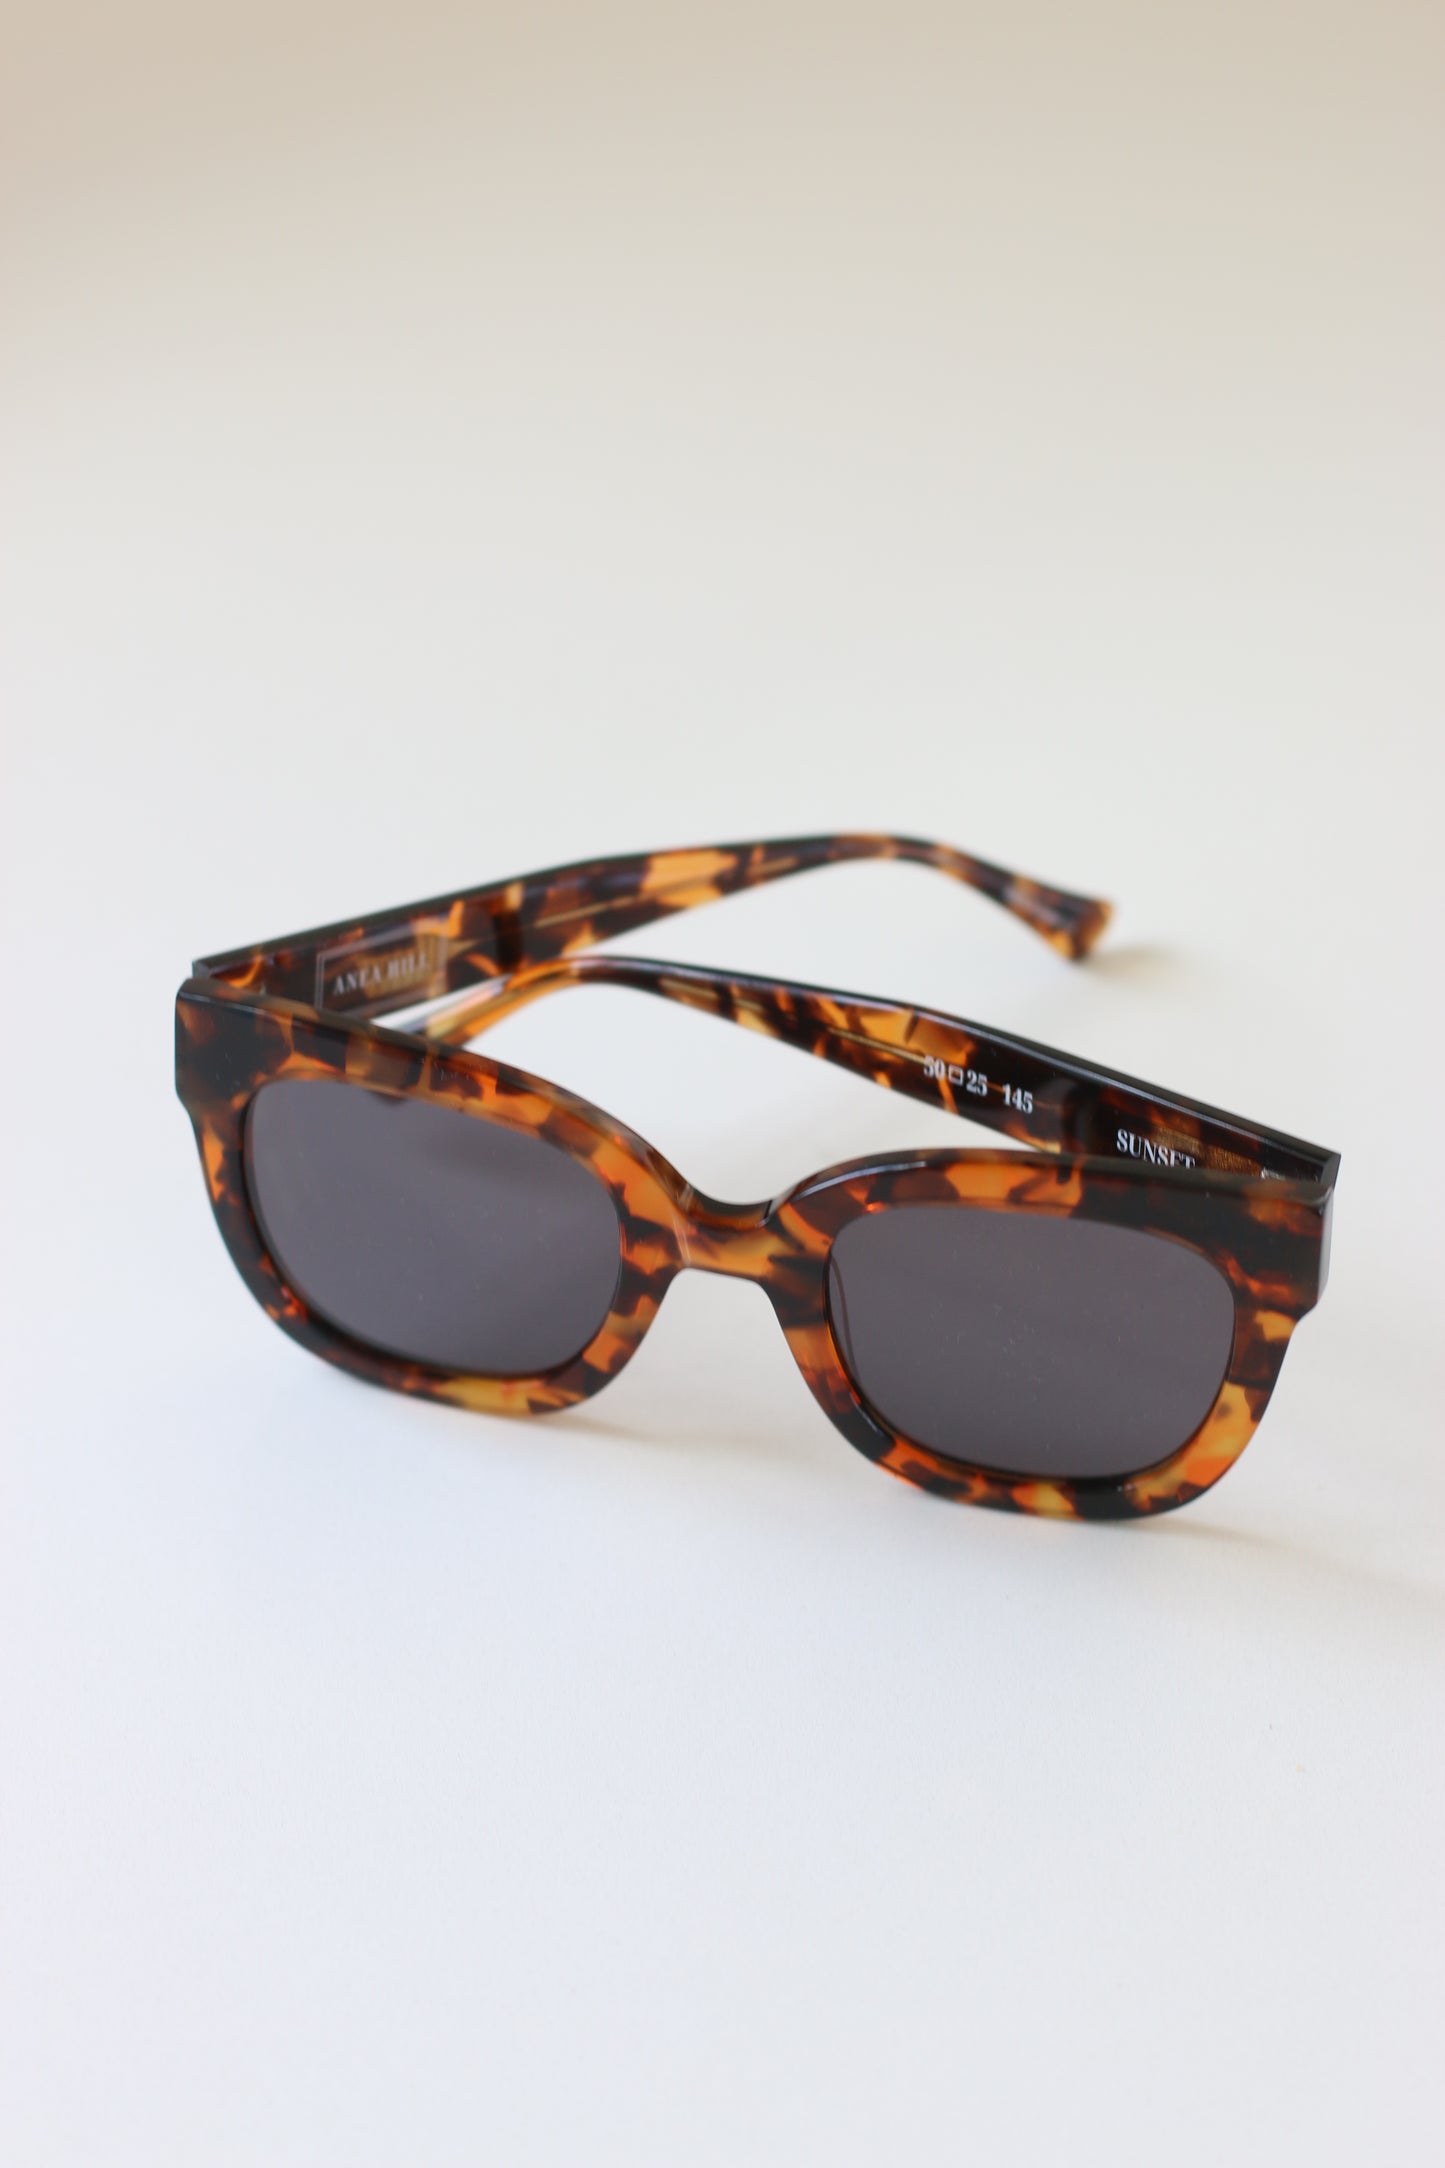 The beautiful tortoise color of these sunglasses adds a touch of elegance and uniqueness to any outfit, making them the perfect accessory for any fashion-savvy individual.